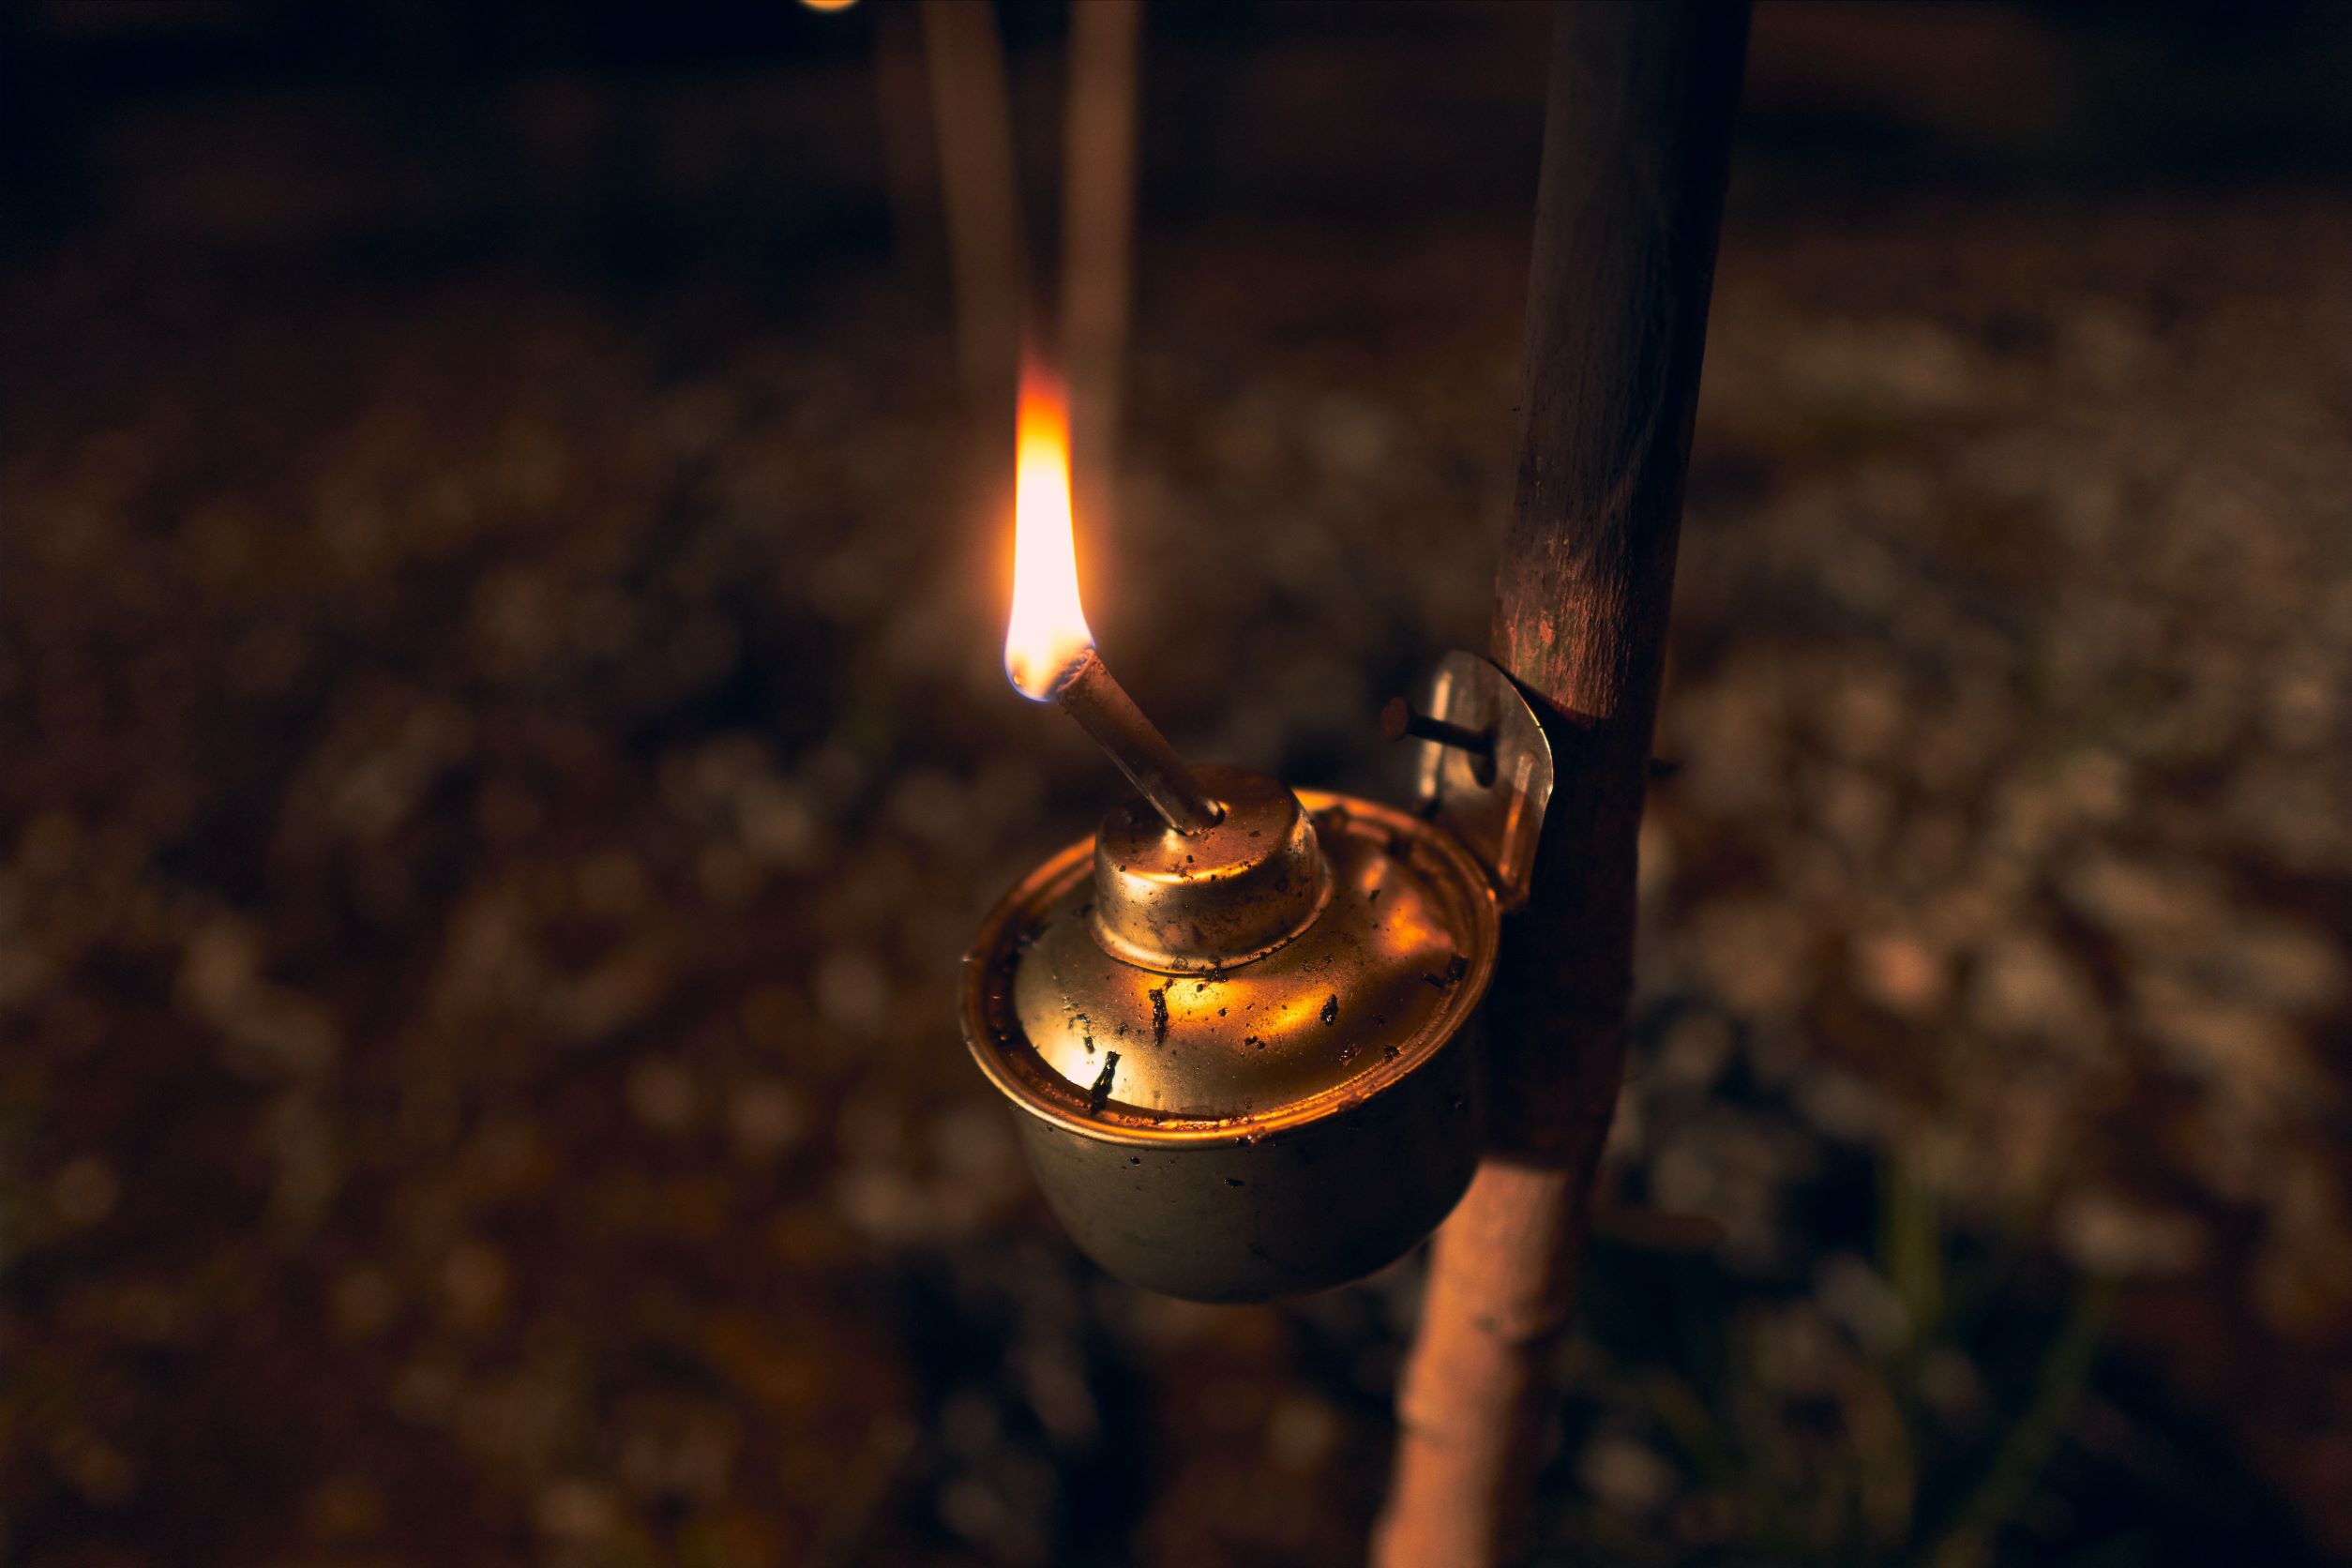 Gas lamp hanging on a stick - image by Ihsan Adityawarman from Pexel